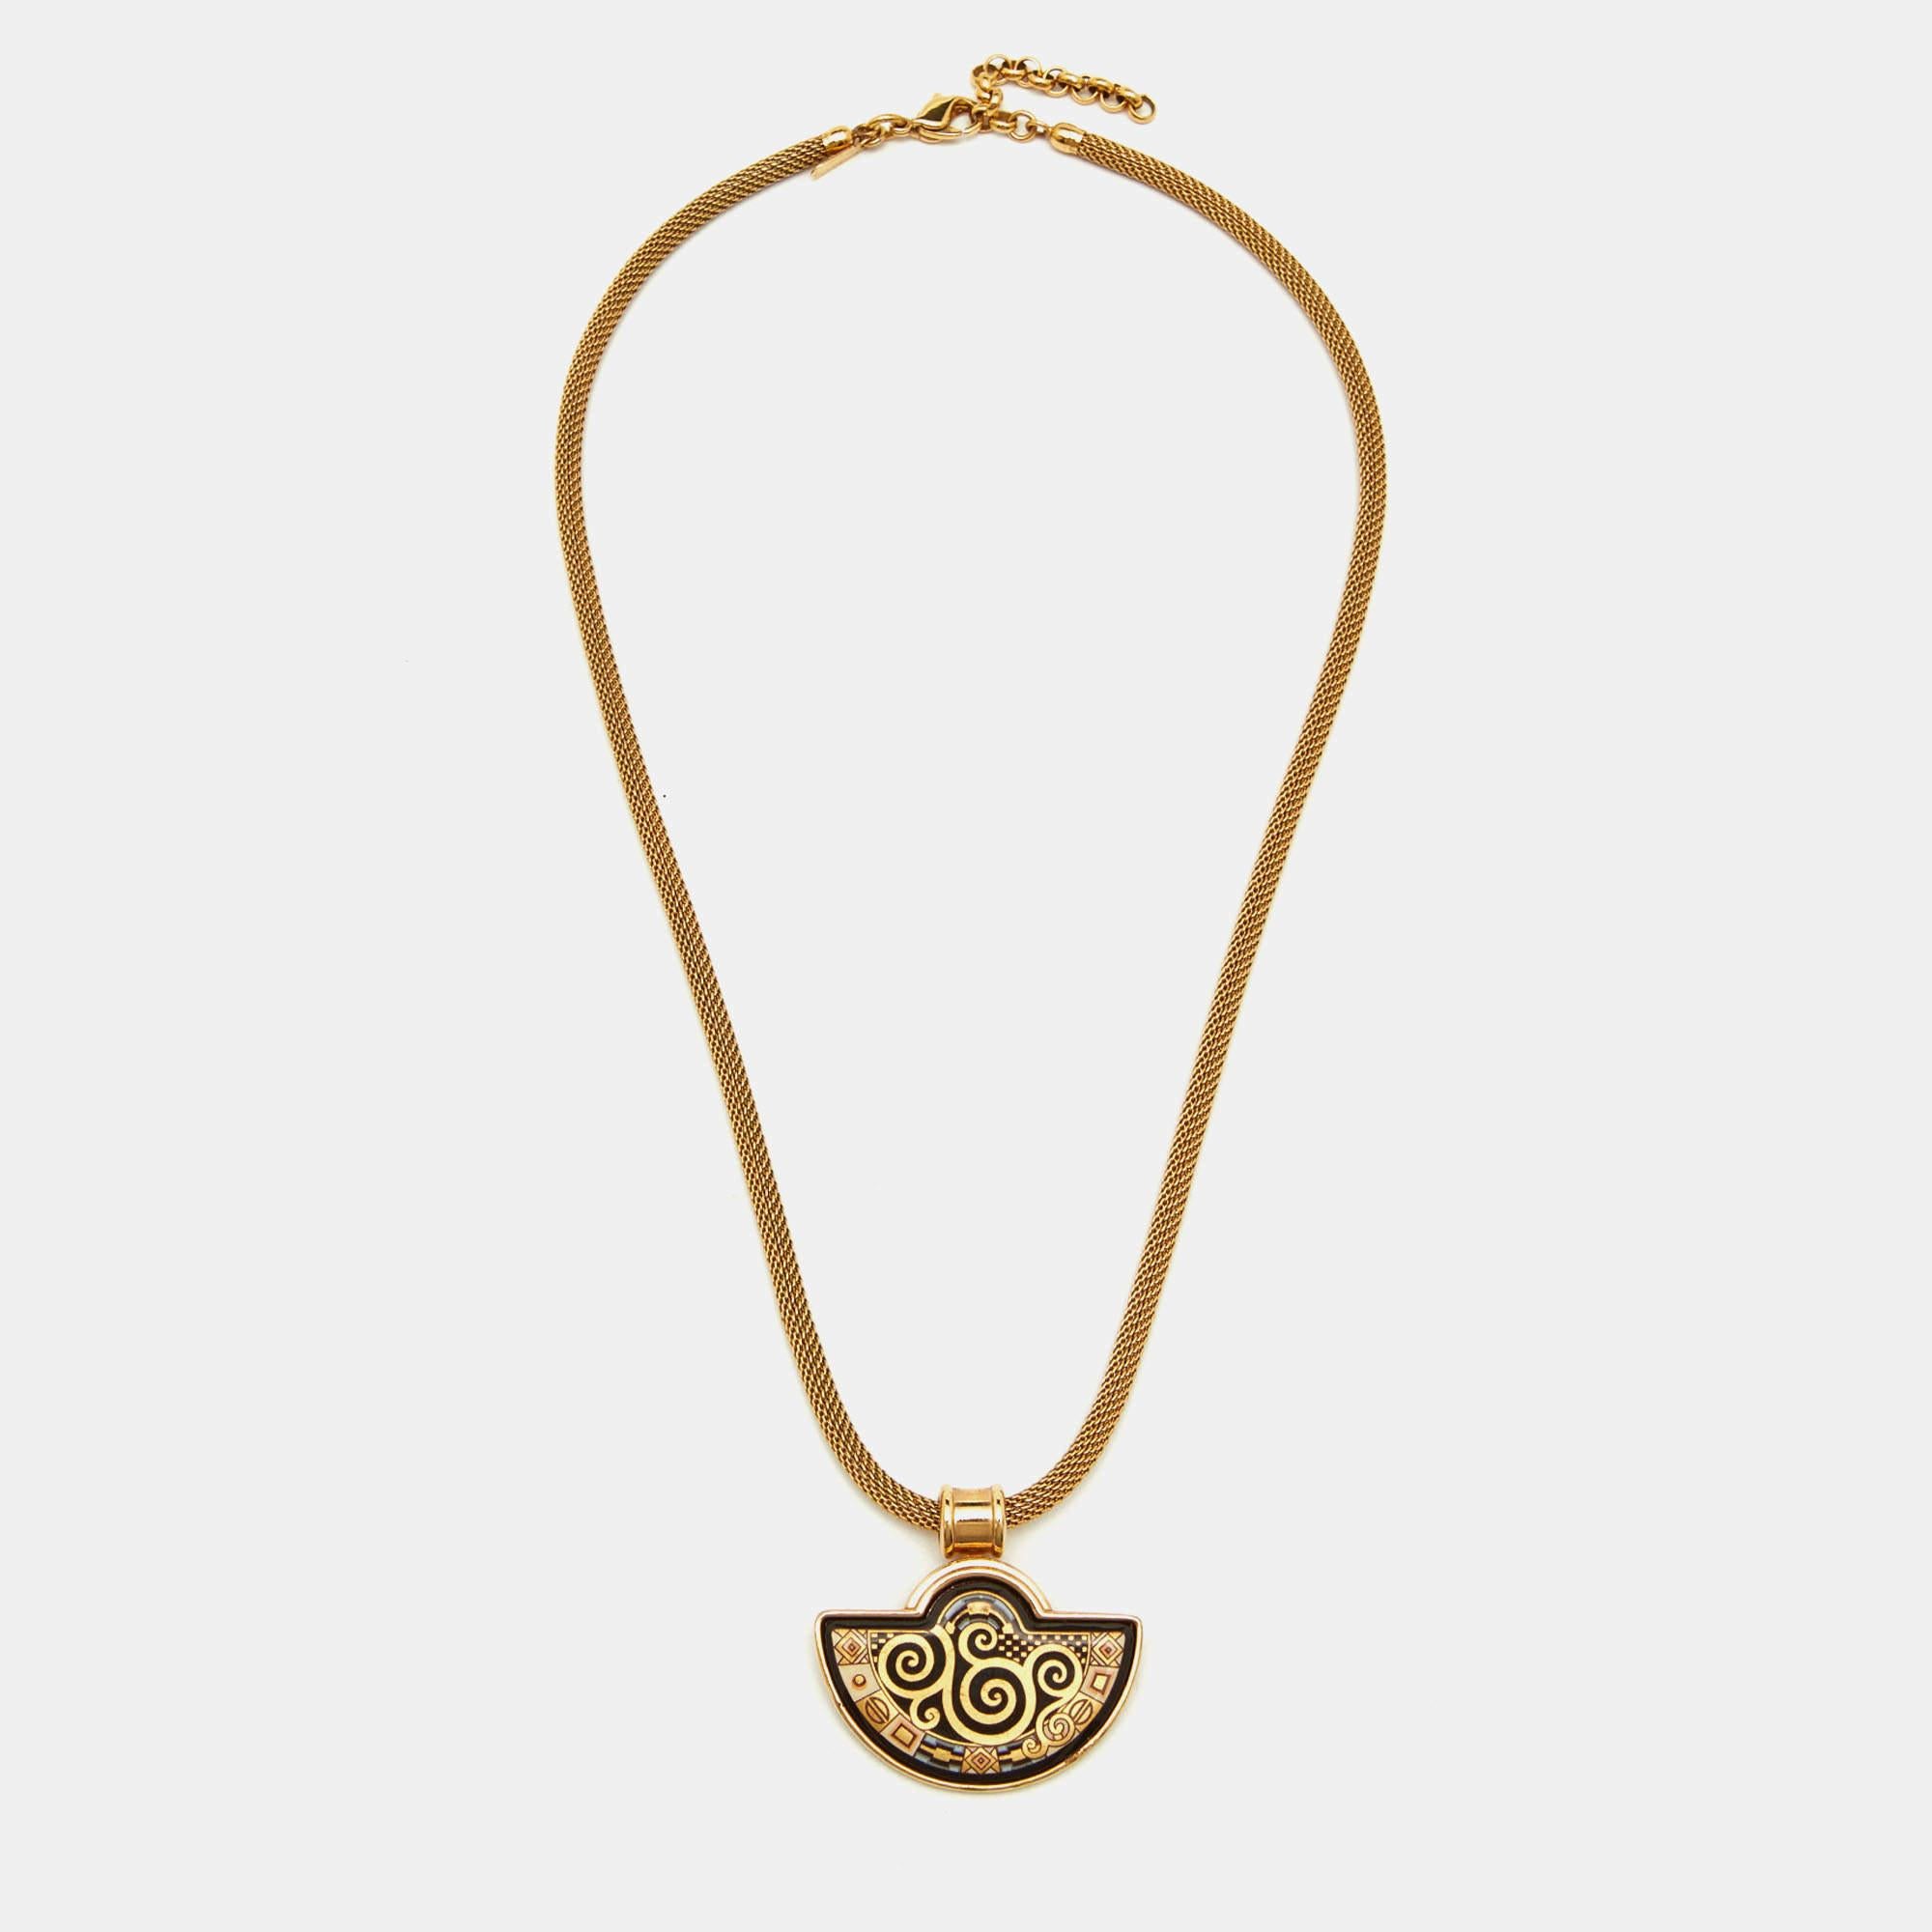 This lovely pendant necklace from Frey Wille is sure to become one of your favorite accessories! It has an enamel-detailed half-moon pendant that comes with an interchangeable cord and chain.

